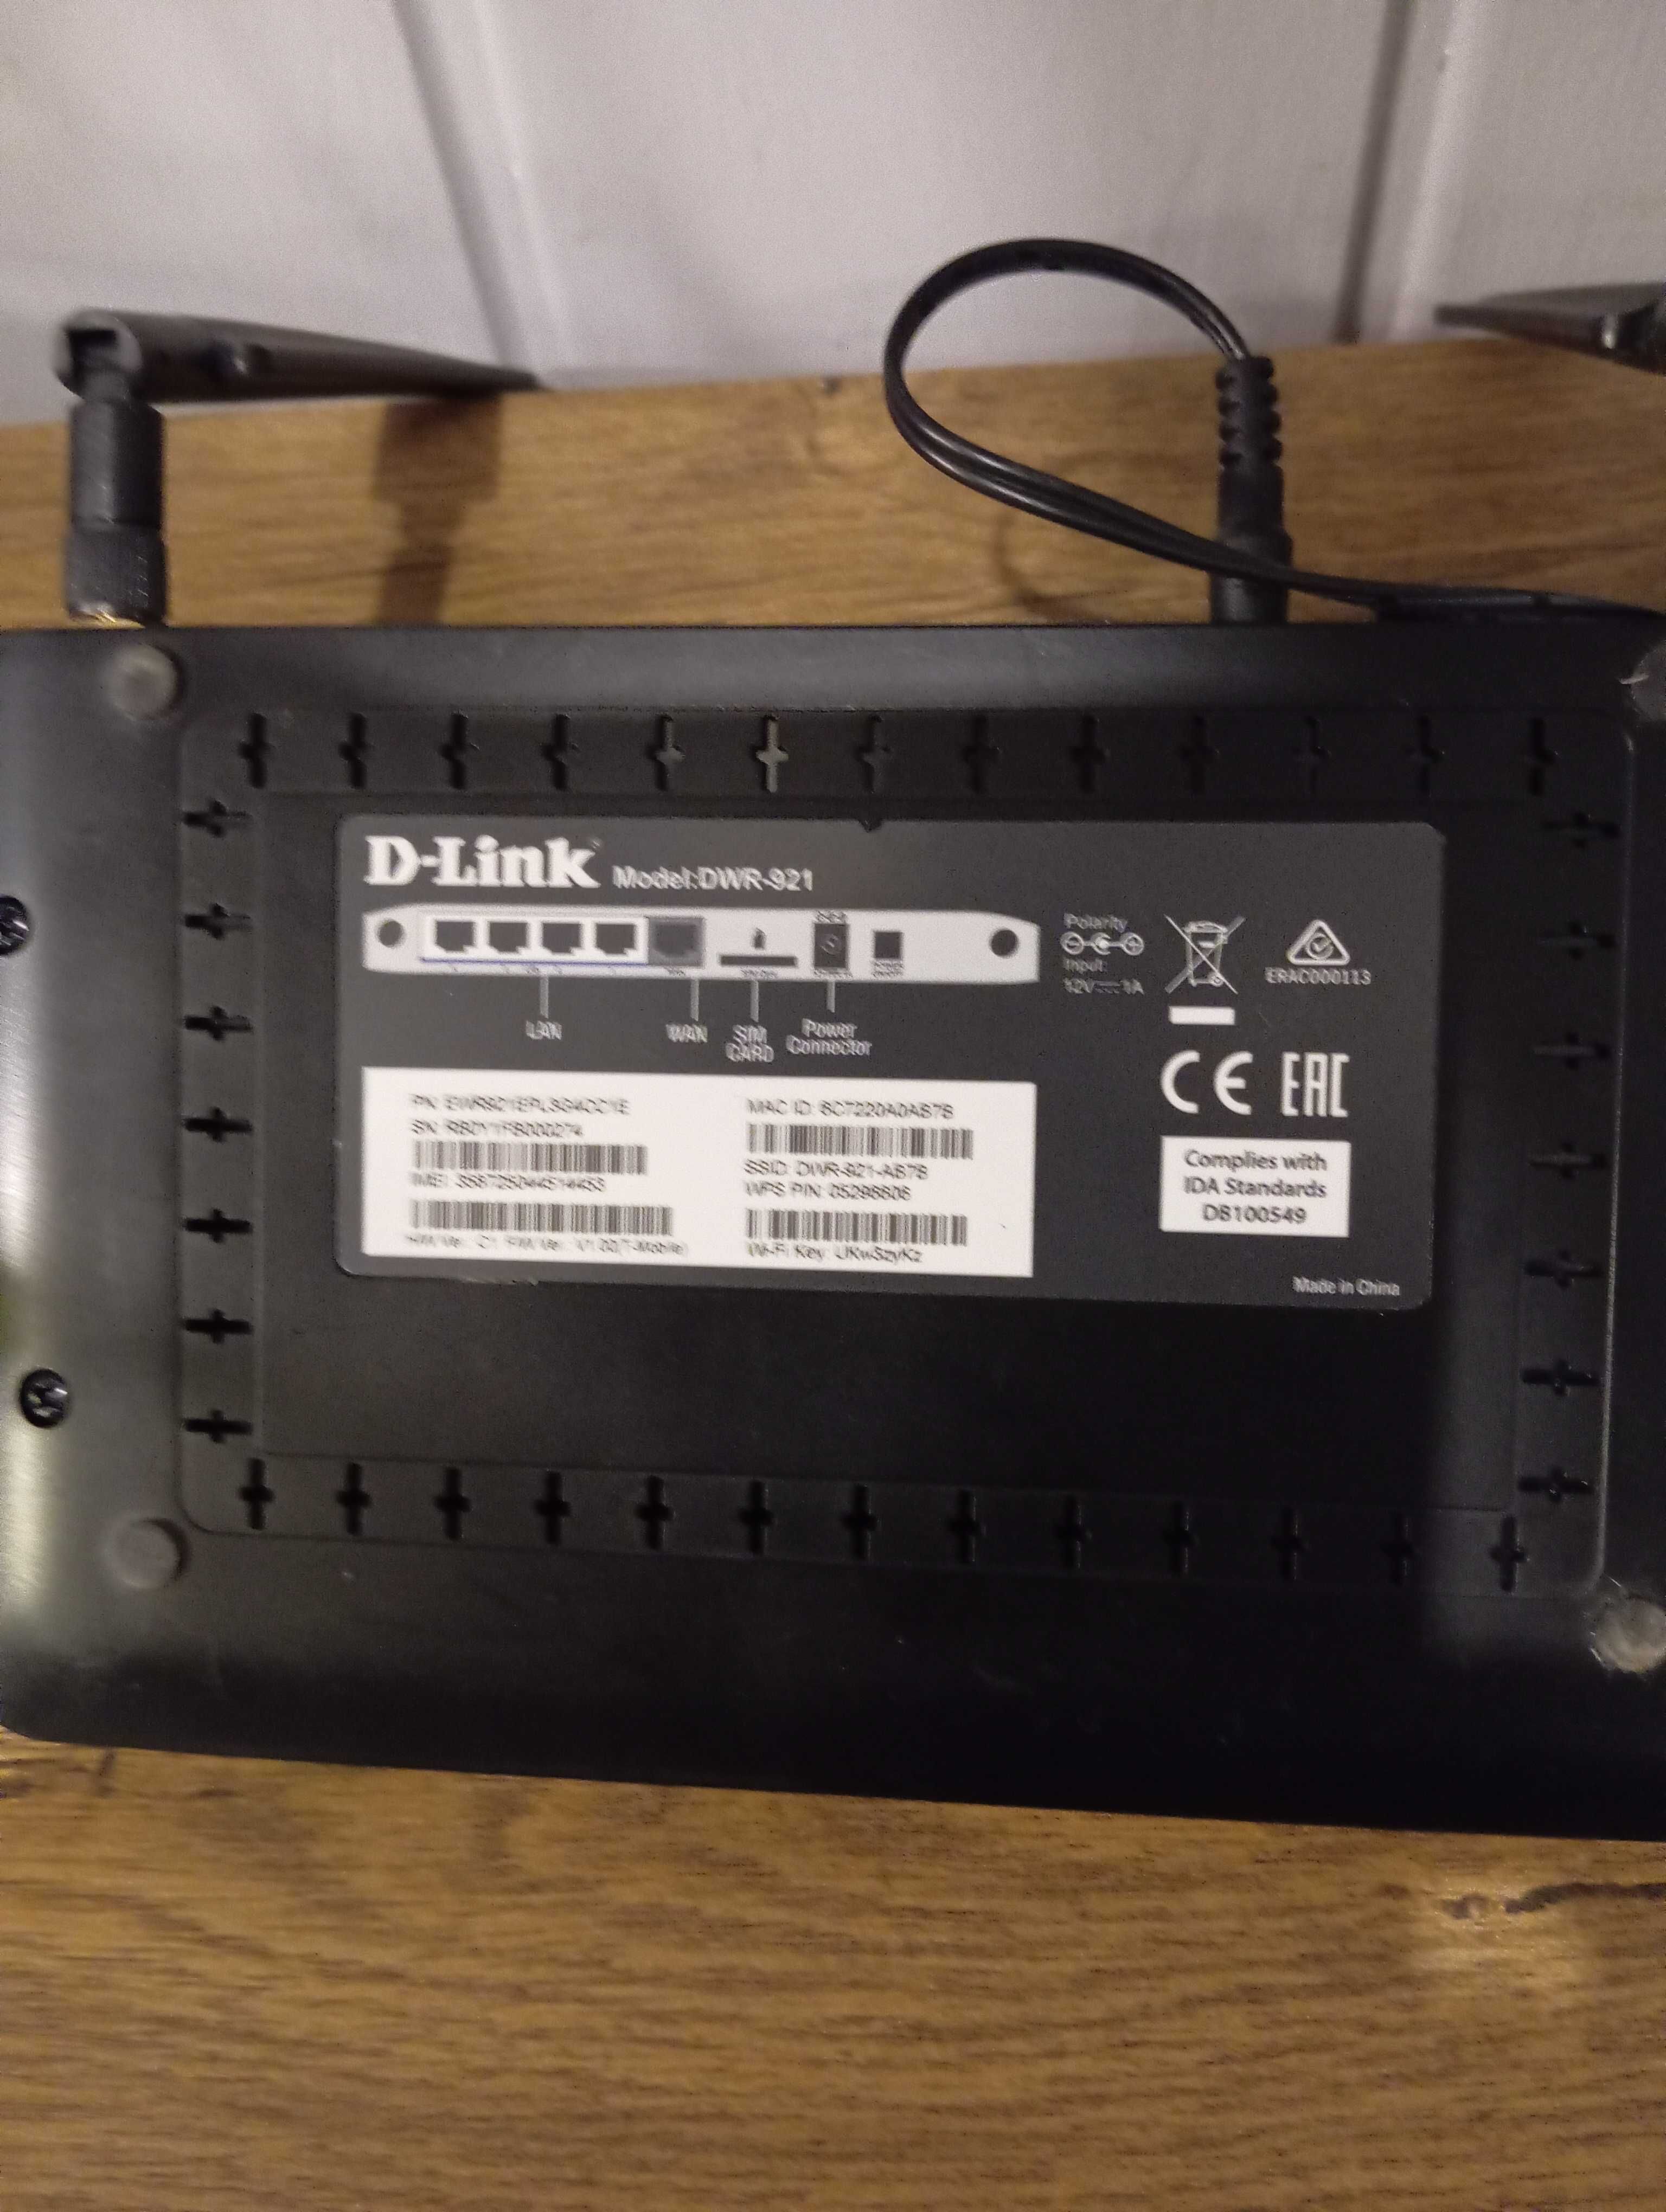 Router D-Link DWR-921 Wi-Fi LTE 4G